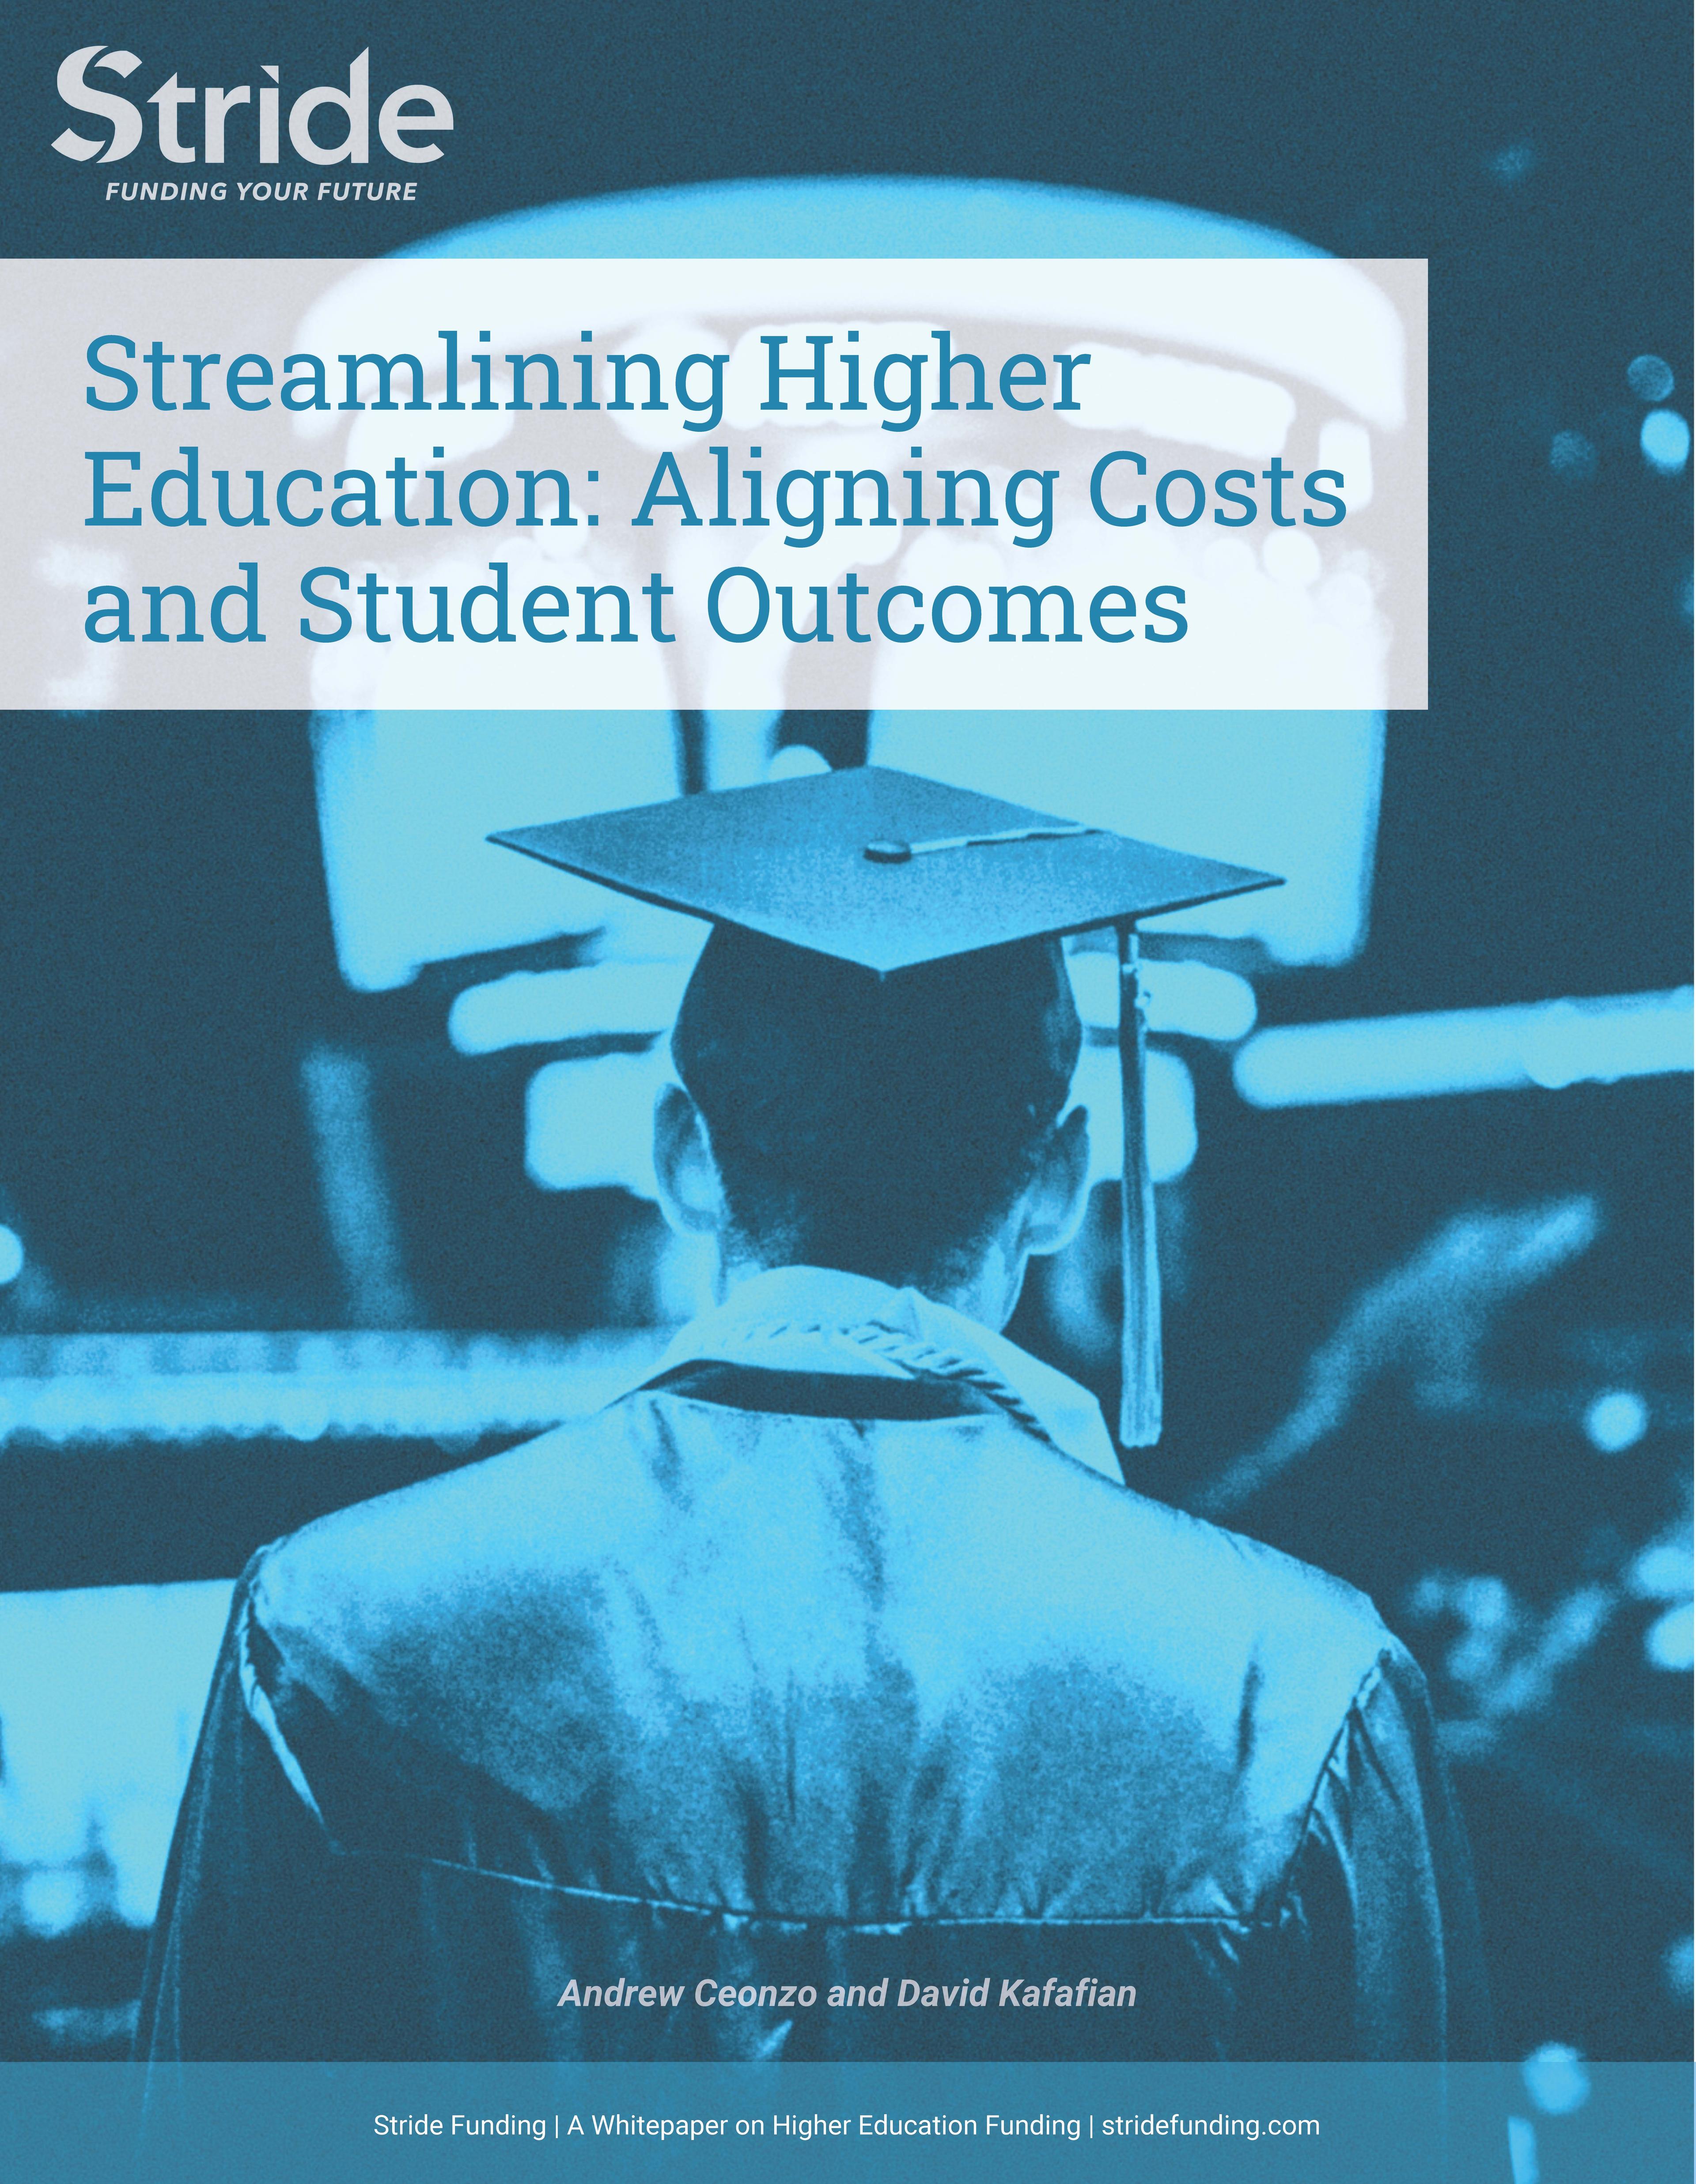 Cover of whitepaper titled "Streamlining Higher Education: Aligning Costs and Student Outcomes"